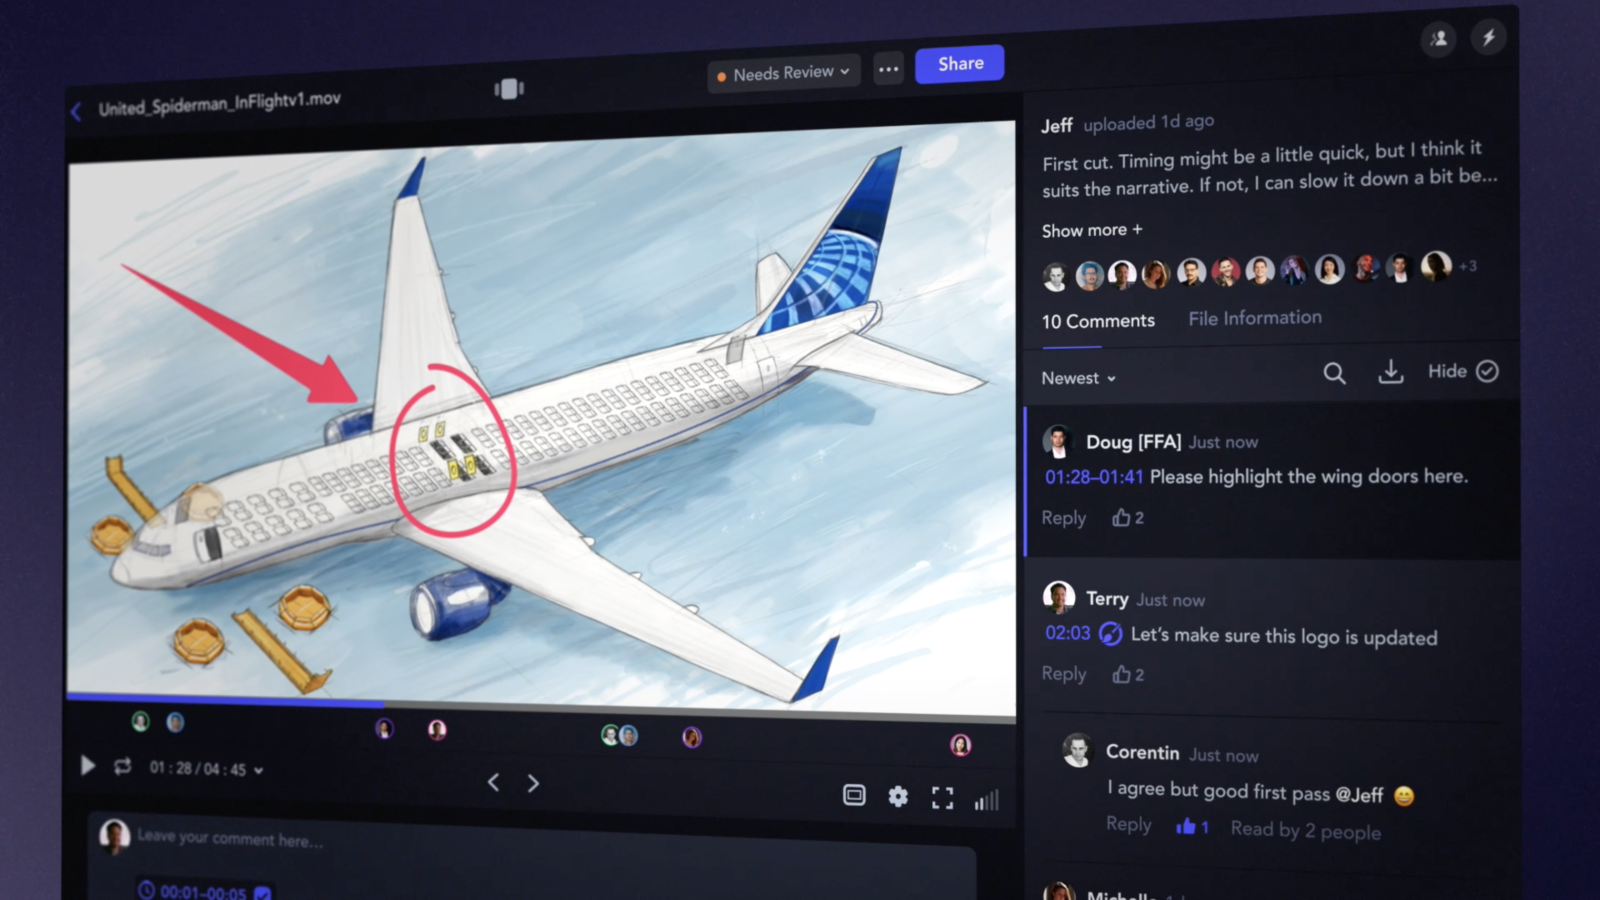 Loom was able to get critical FAA feedback and approval right inside Frame.io for their United Airlines safety videos.